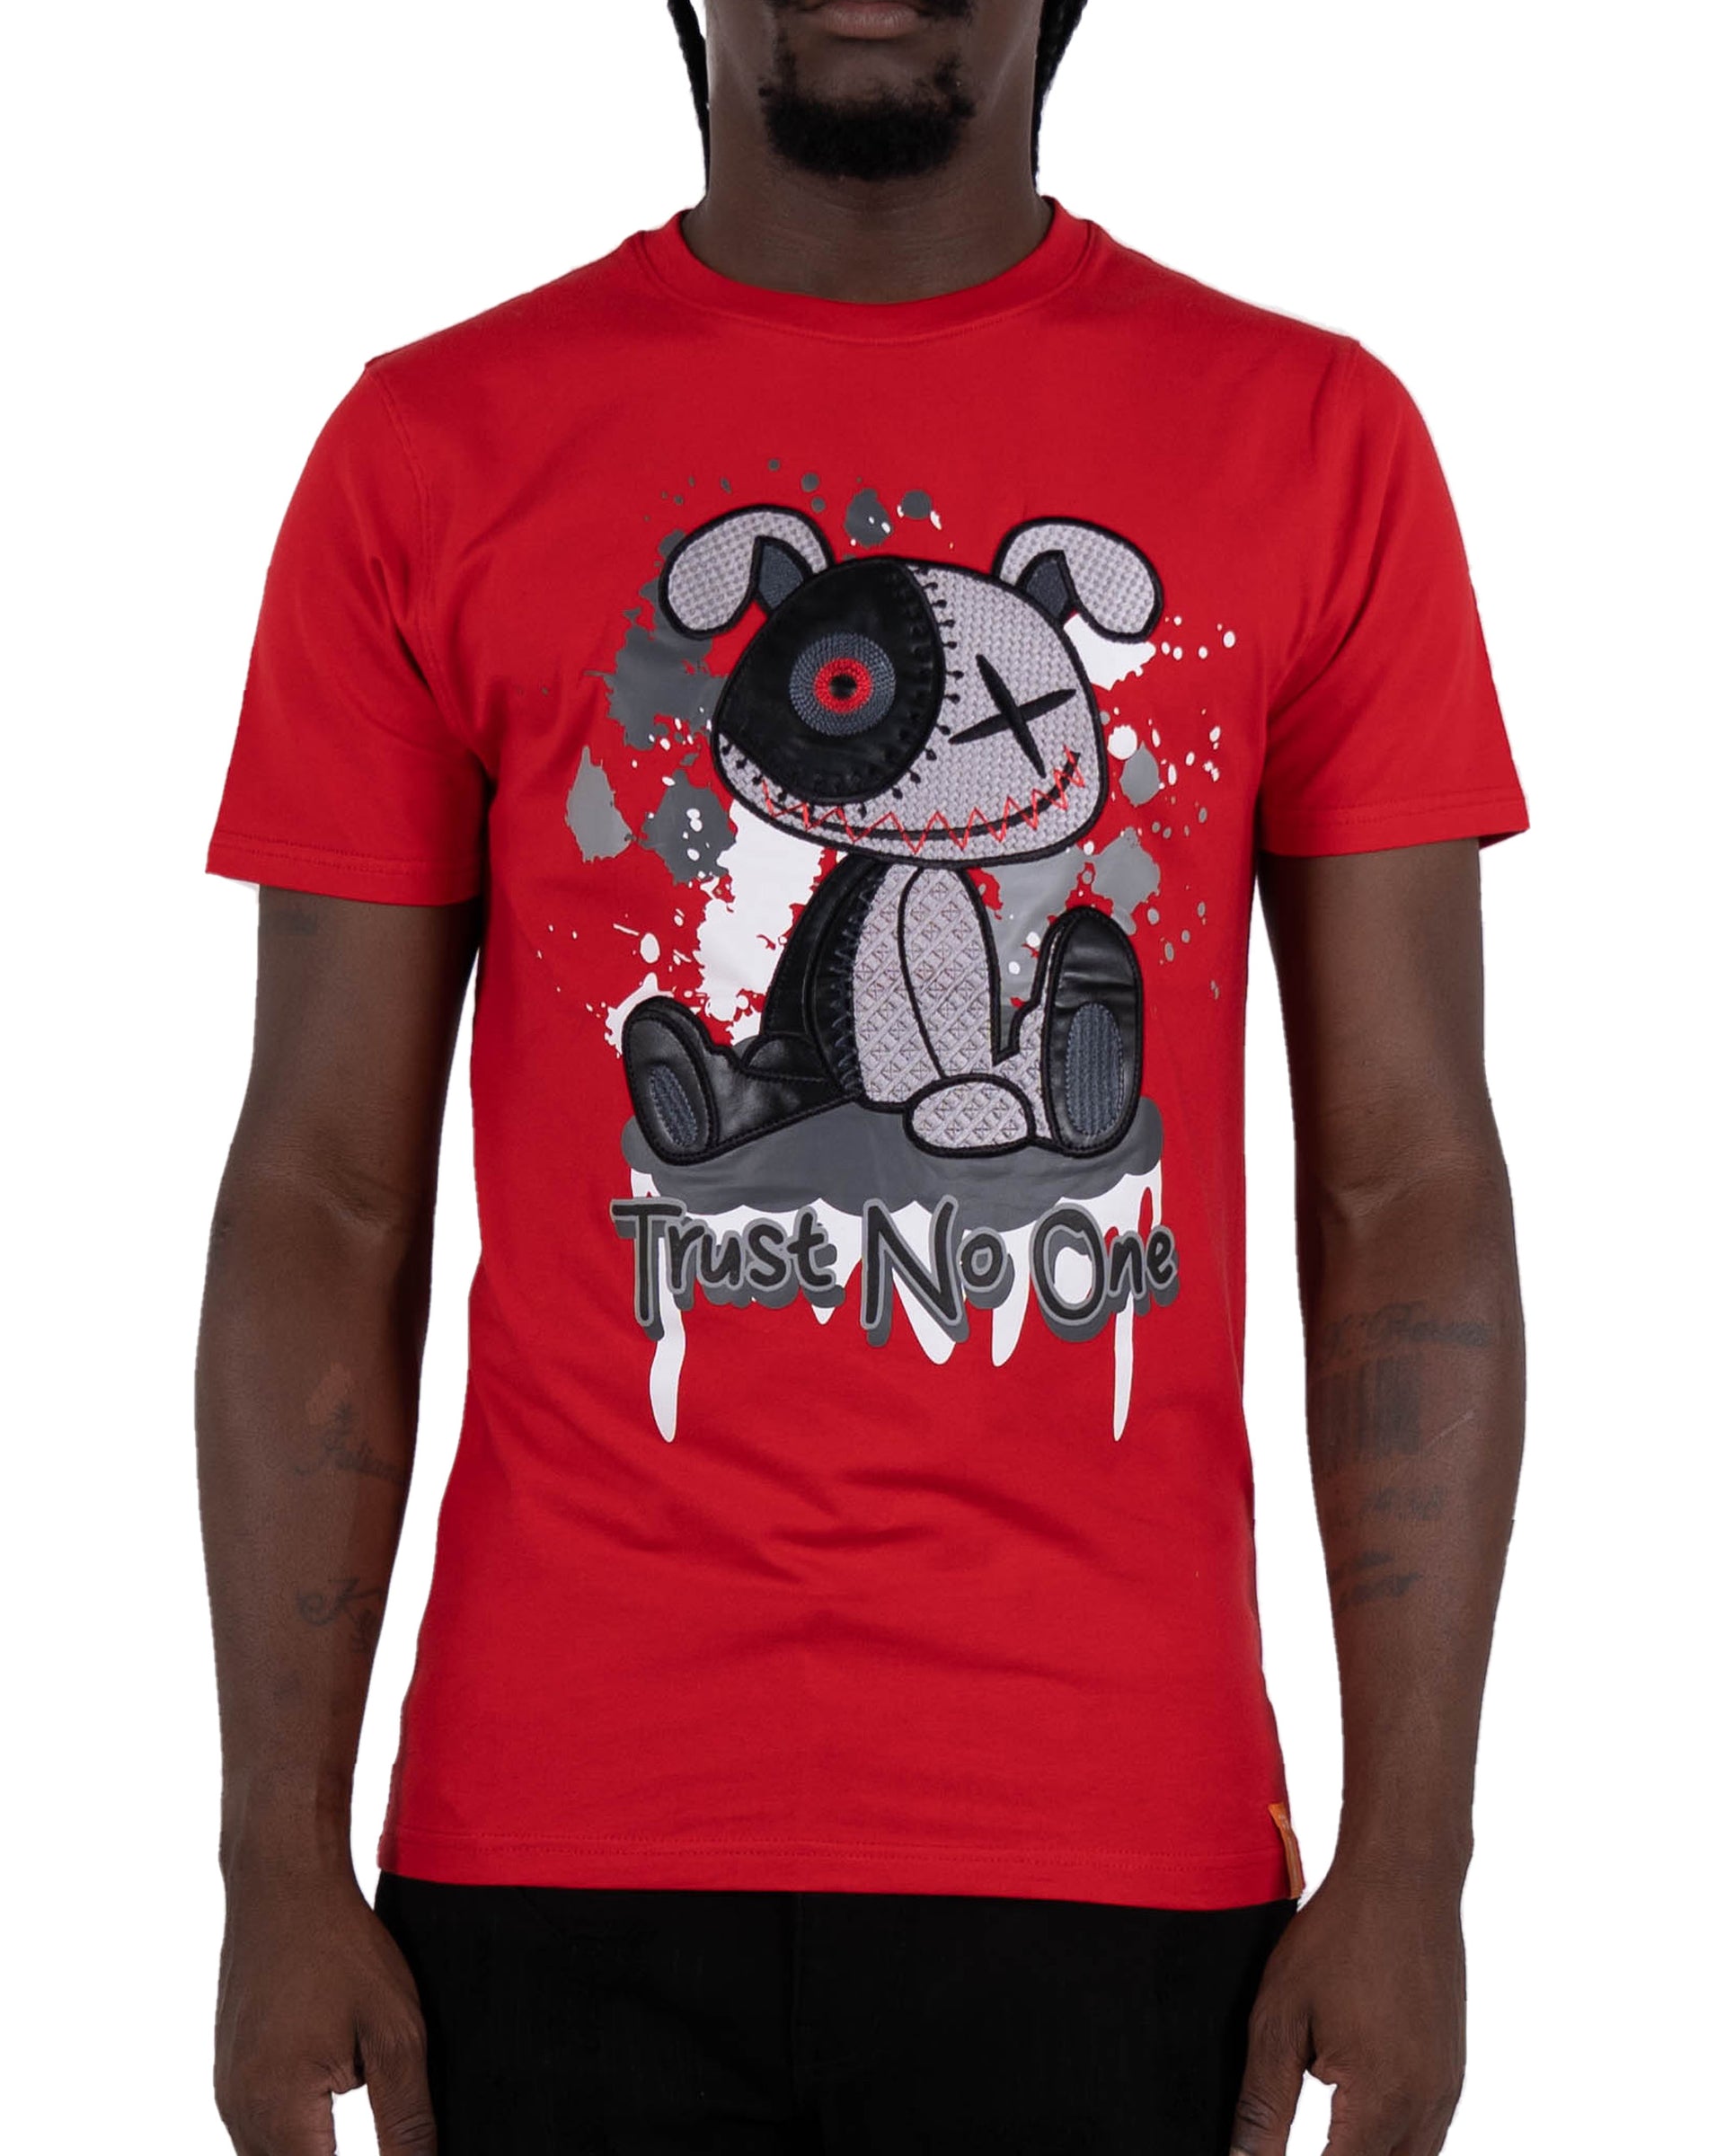 Men's "Trust No One" Embroidered Graphic T-Shirt | Red